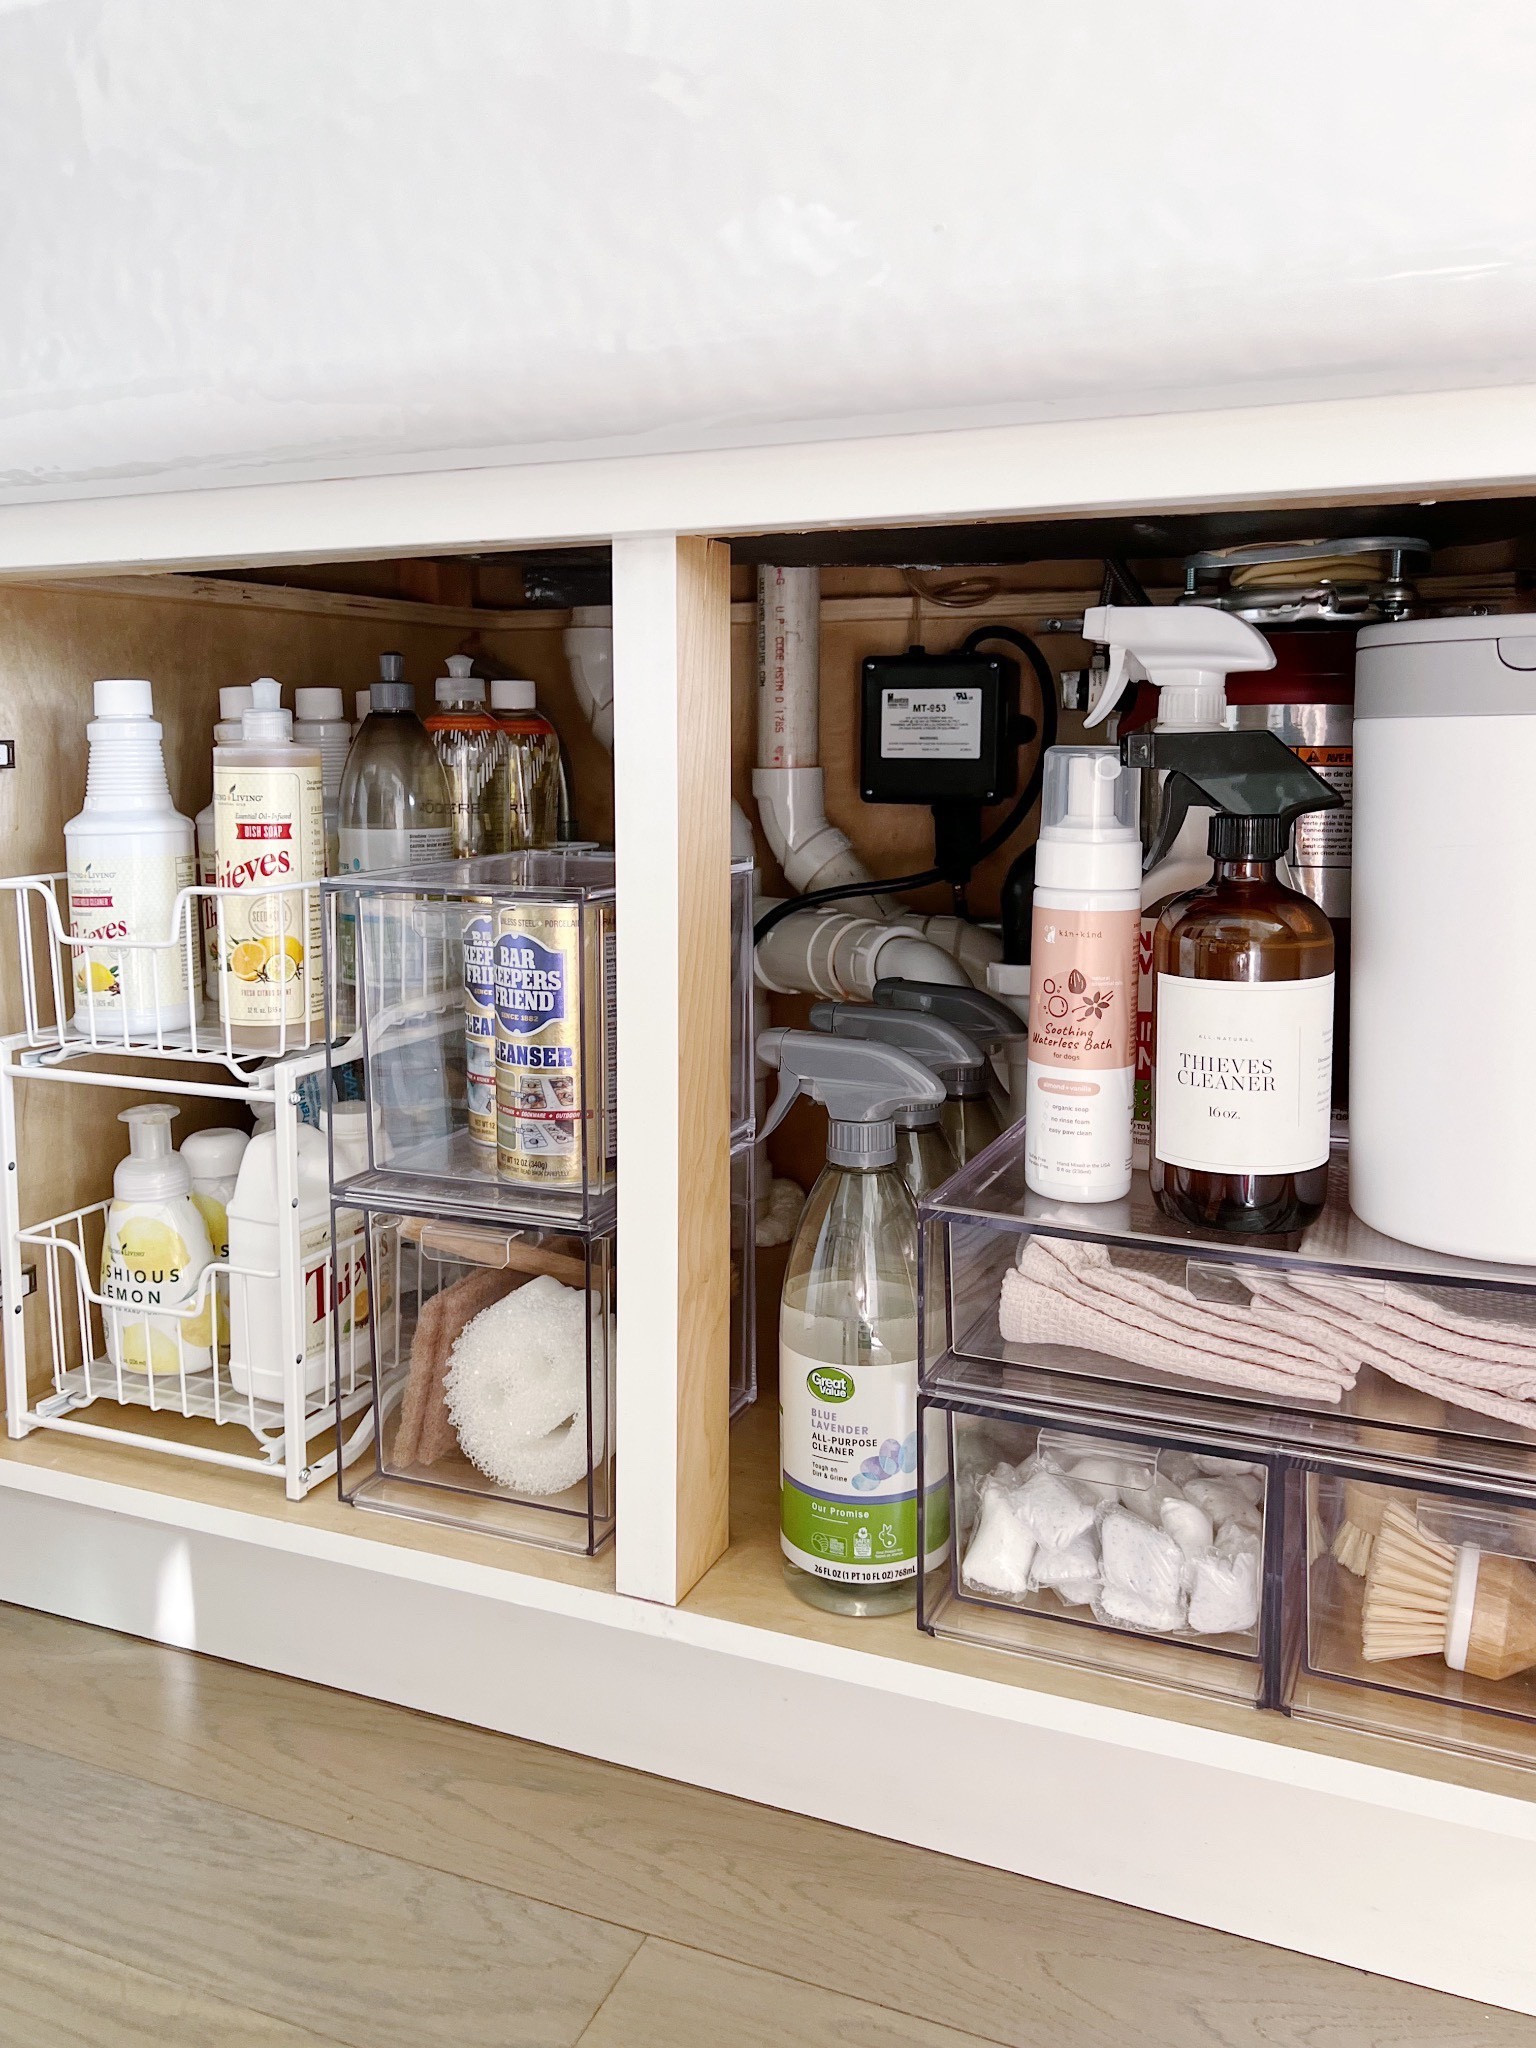 Cabinet organizer (STORi Audrey Stackable Clear Bin Plastic Or